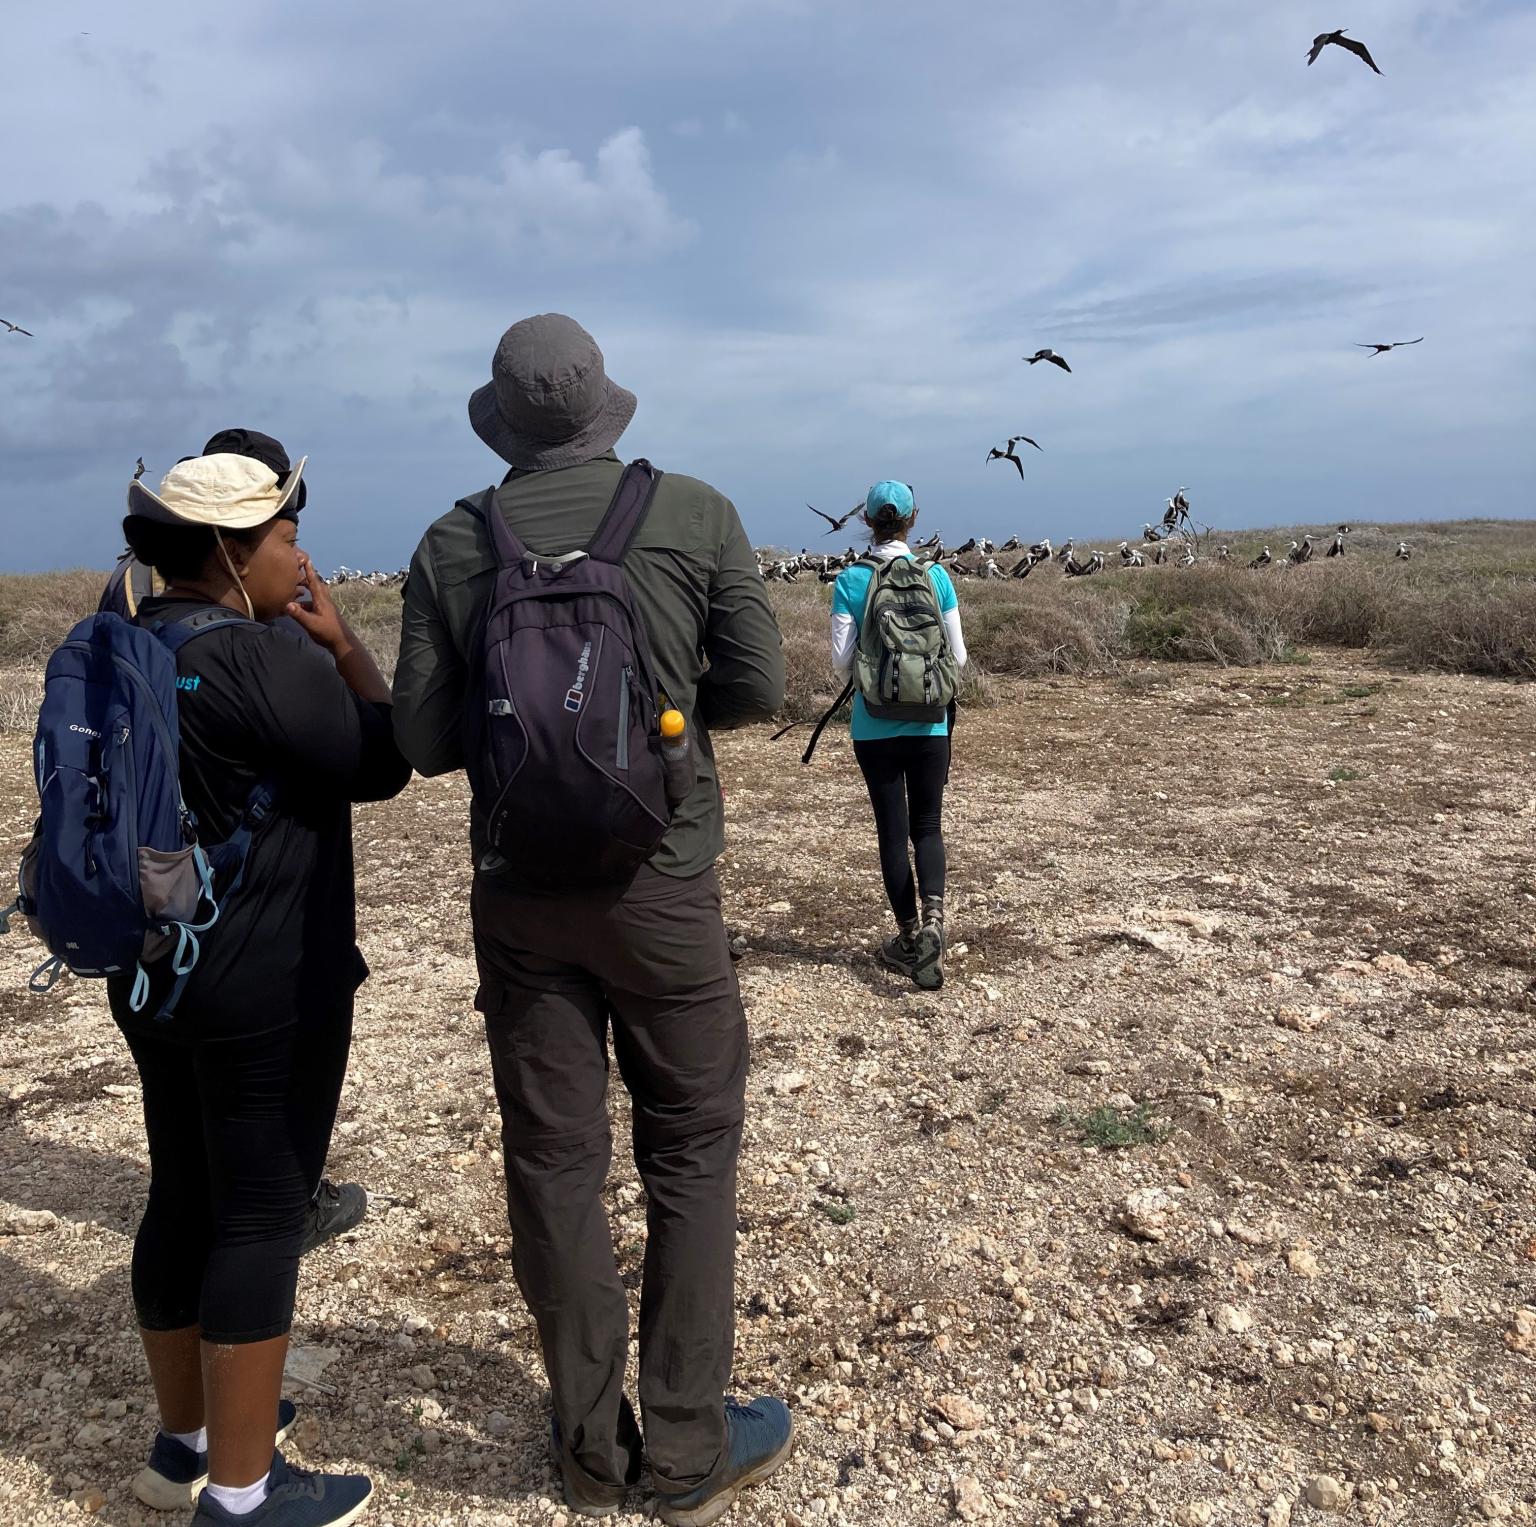 UKCEH and Anguilla National Trust staff observe birds on Dog Island, Anguilla